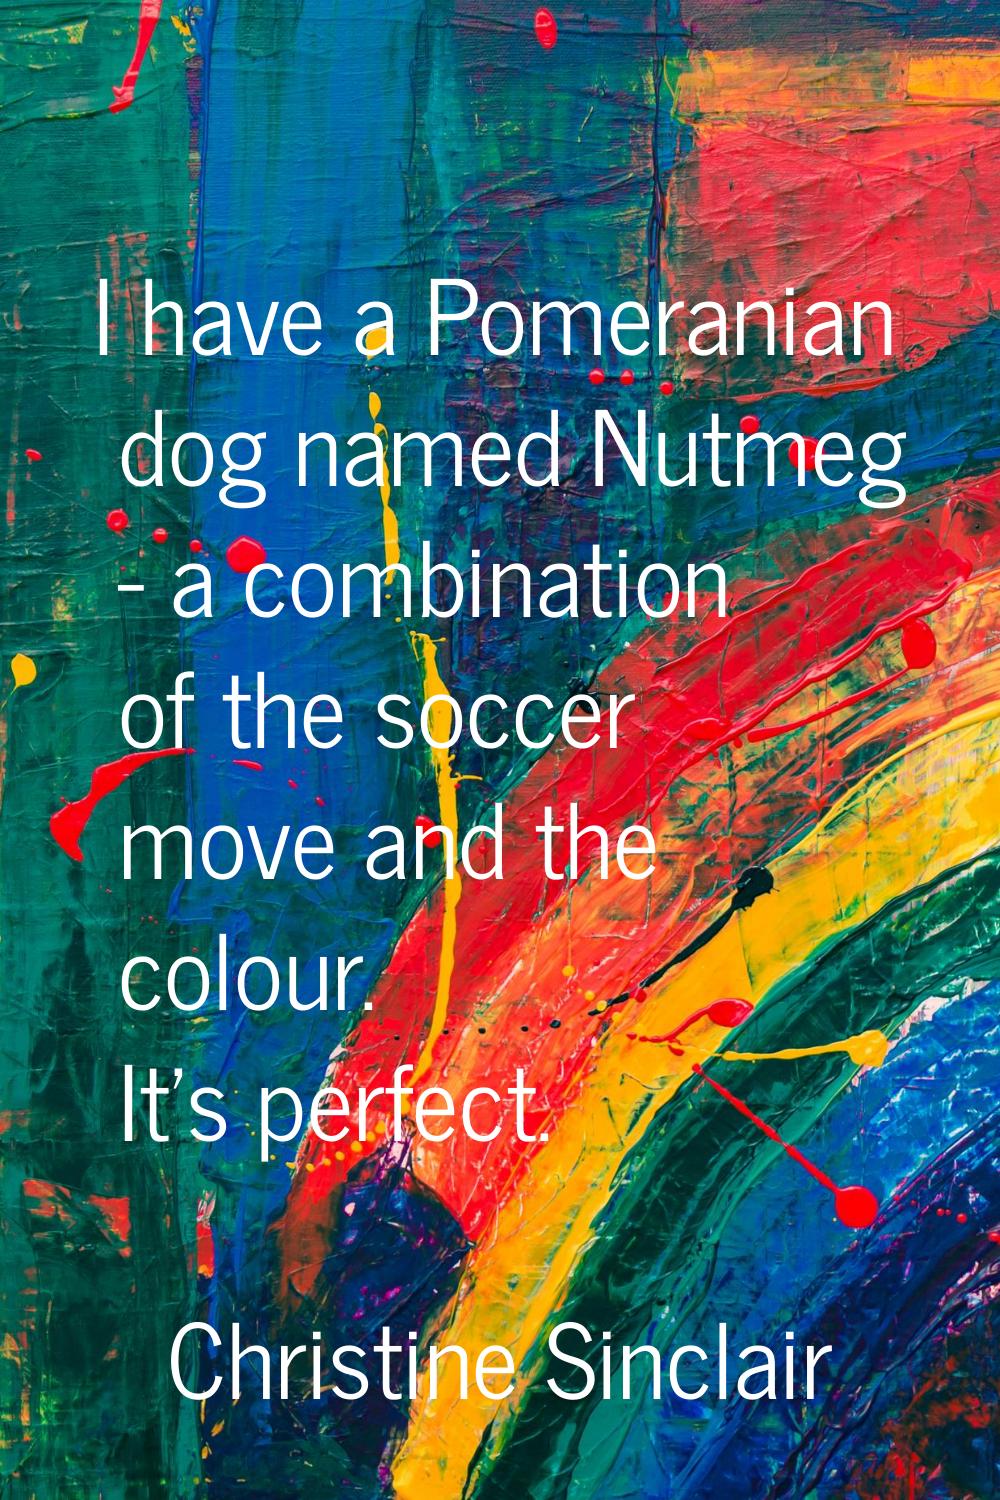 I have a Pomeranian dog named Nutmeg - a combination of the soccer move and the colour. It's perfec